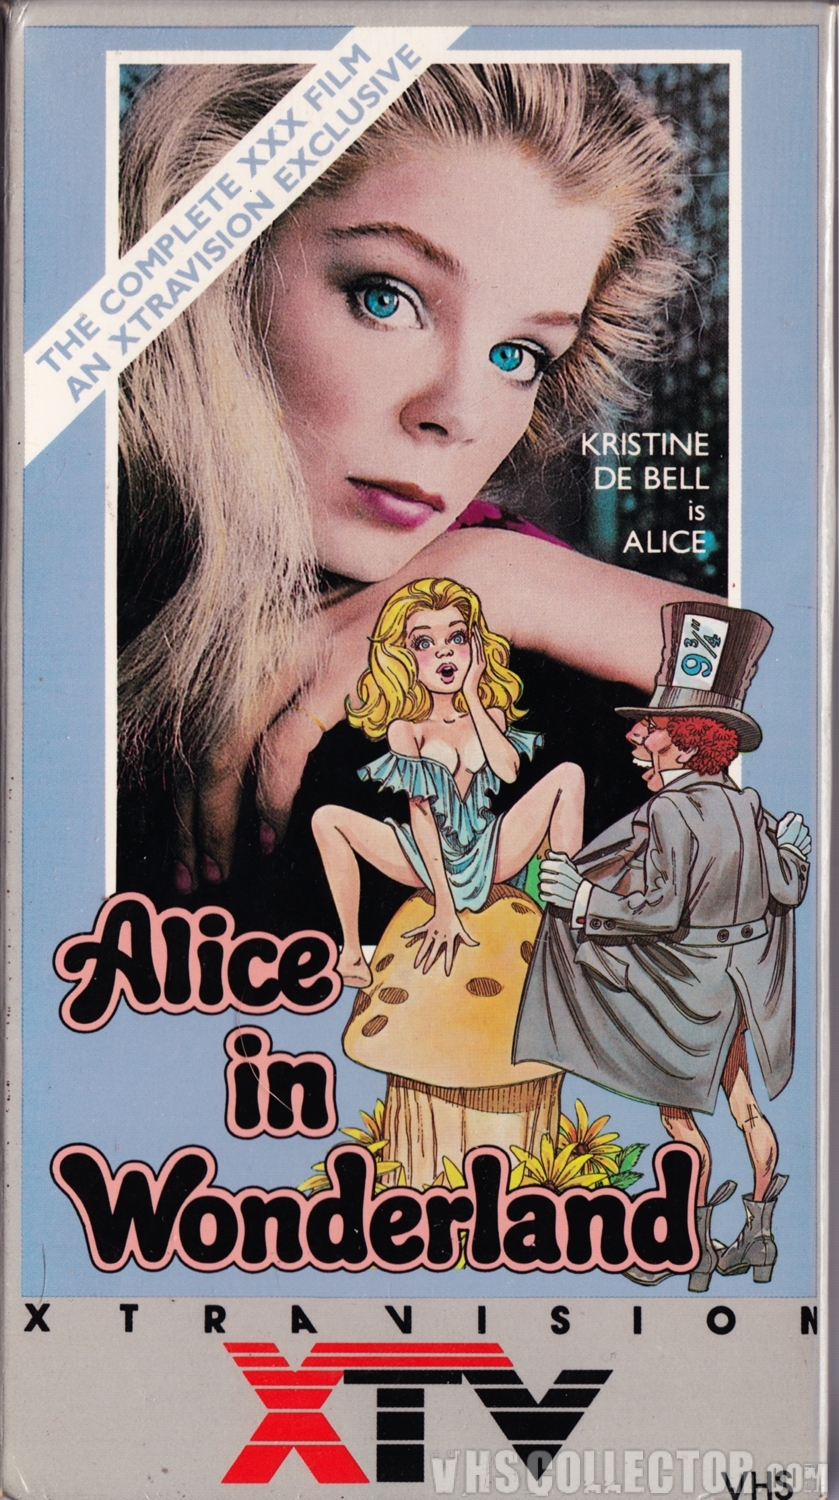 andrea green williams recommends alice in wonderland debell pic